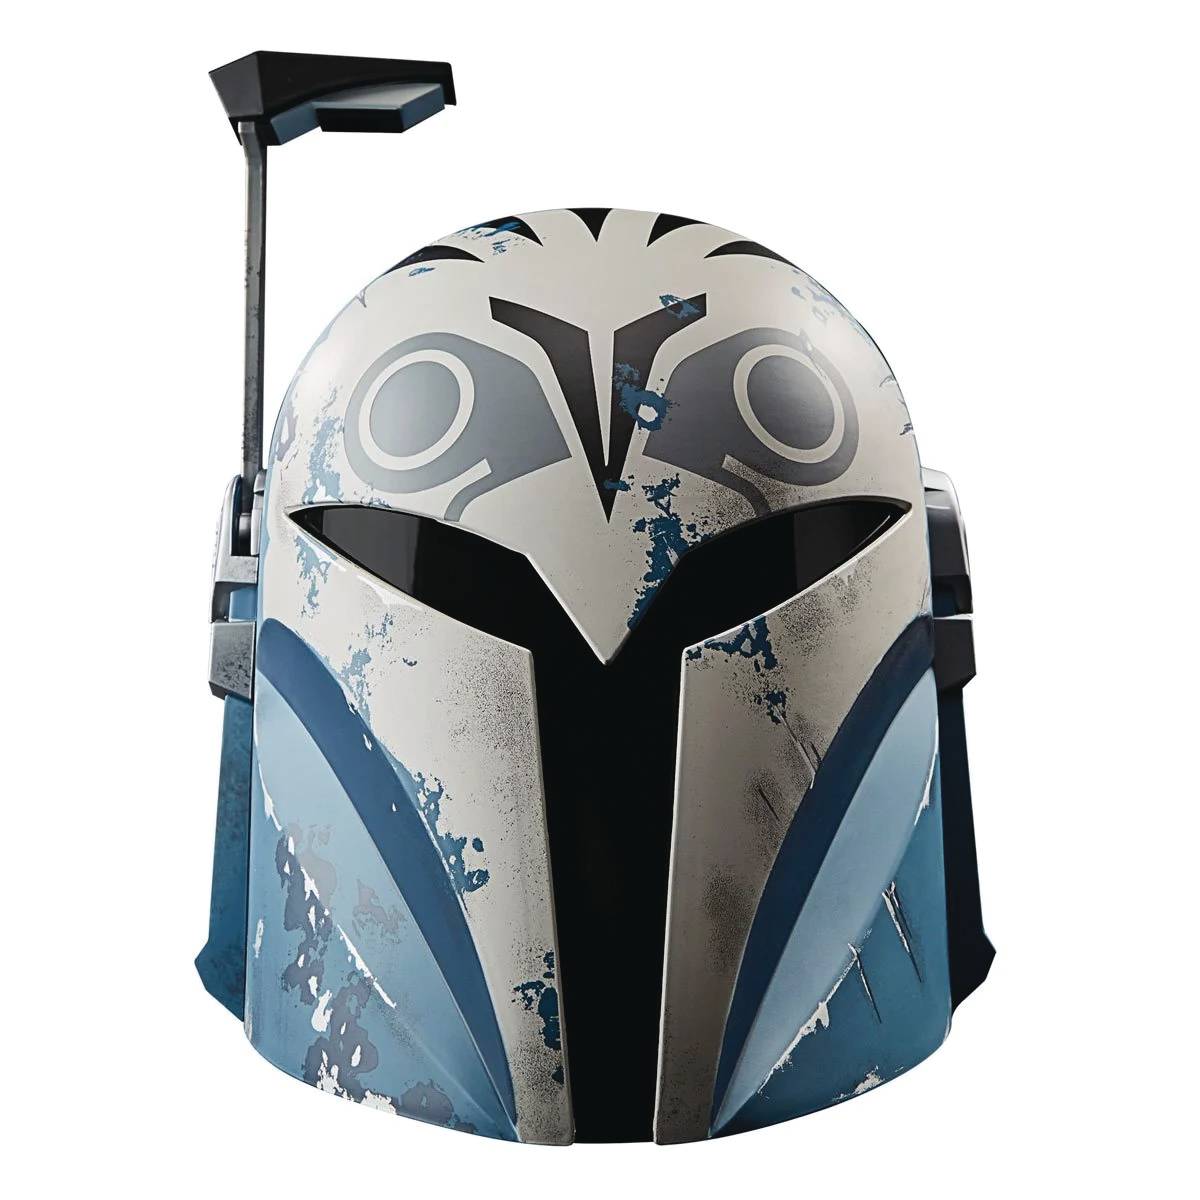 Star Wars Black Series Bo-Katan Electronic Helmet with sounds and Rangefinder